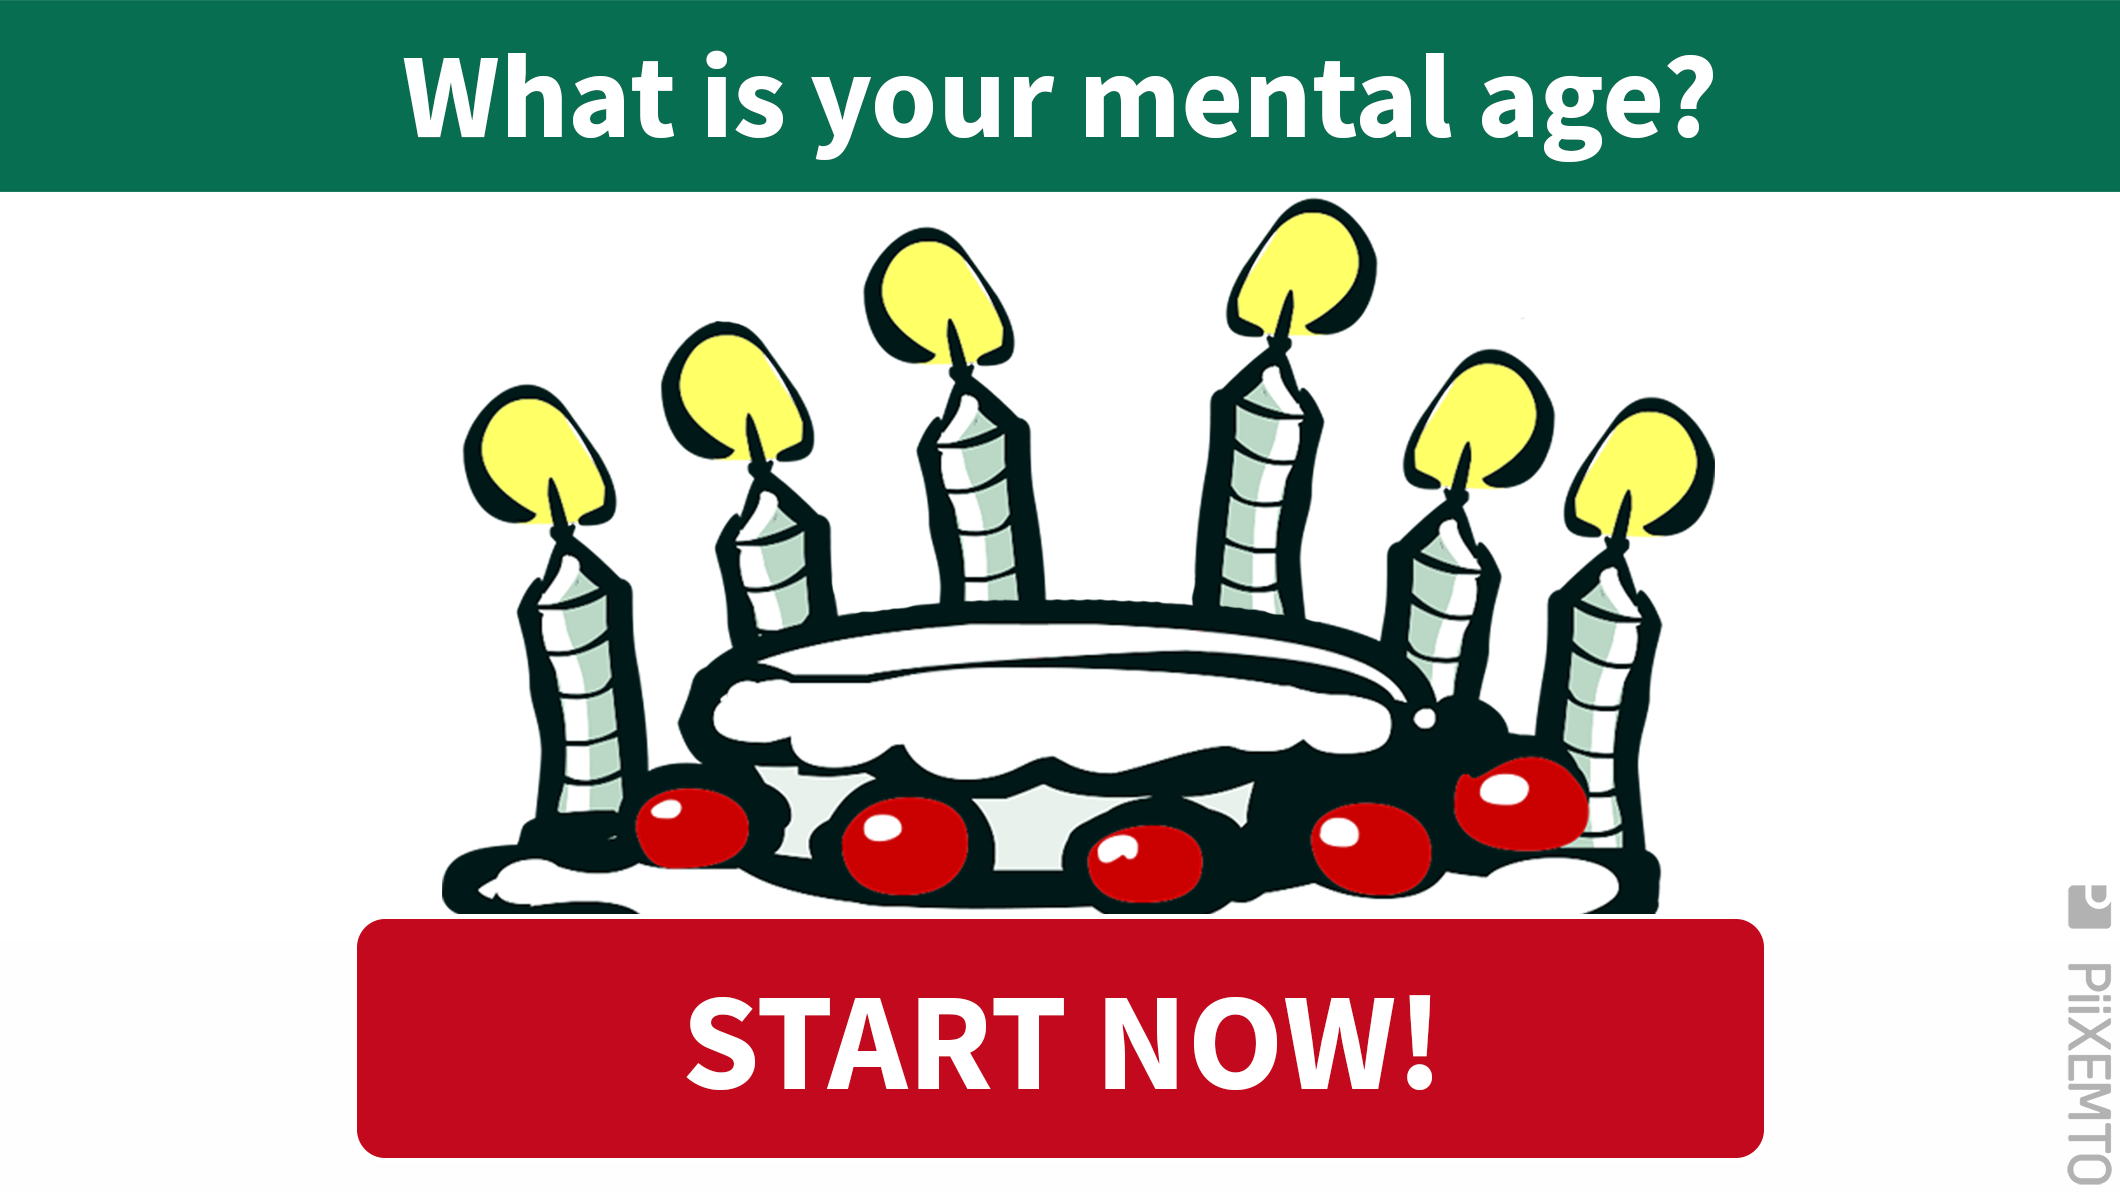 What’s your mental age? Take the test!